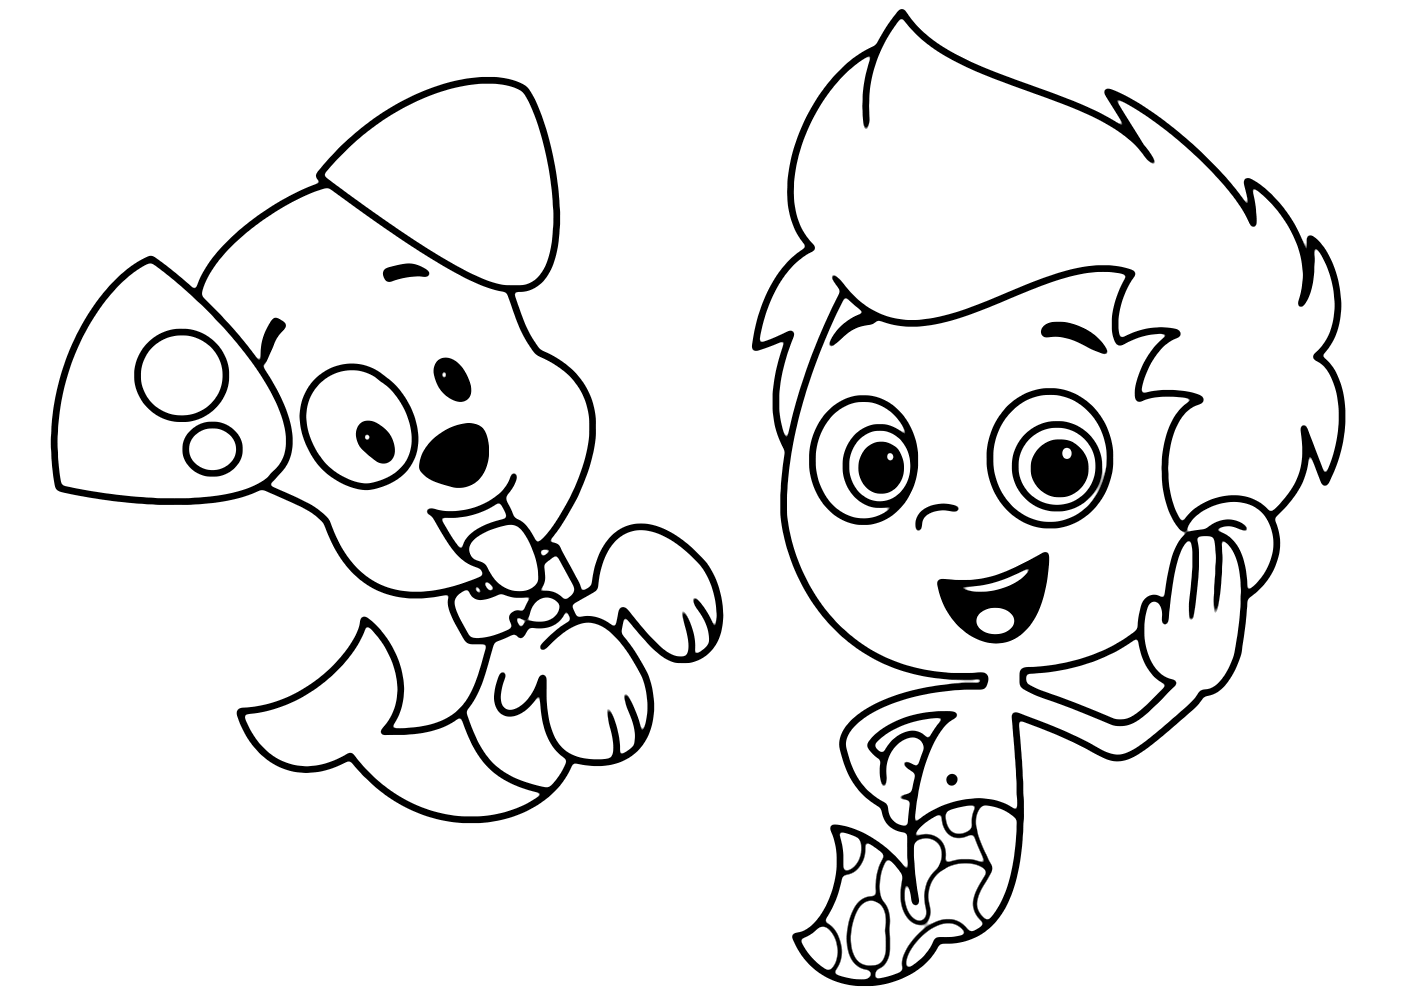 Gil and Puppy Bubble Guppies Coloring Page